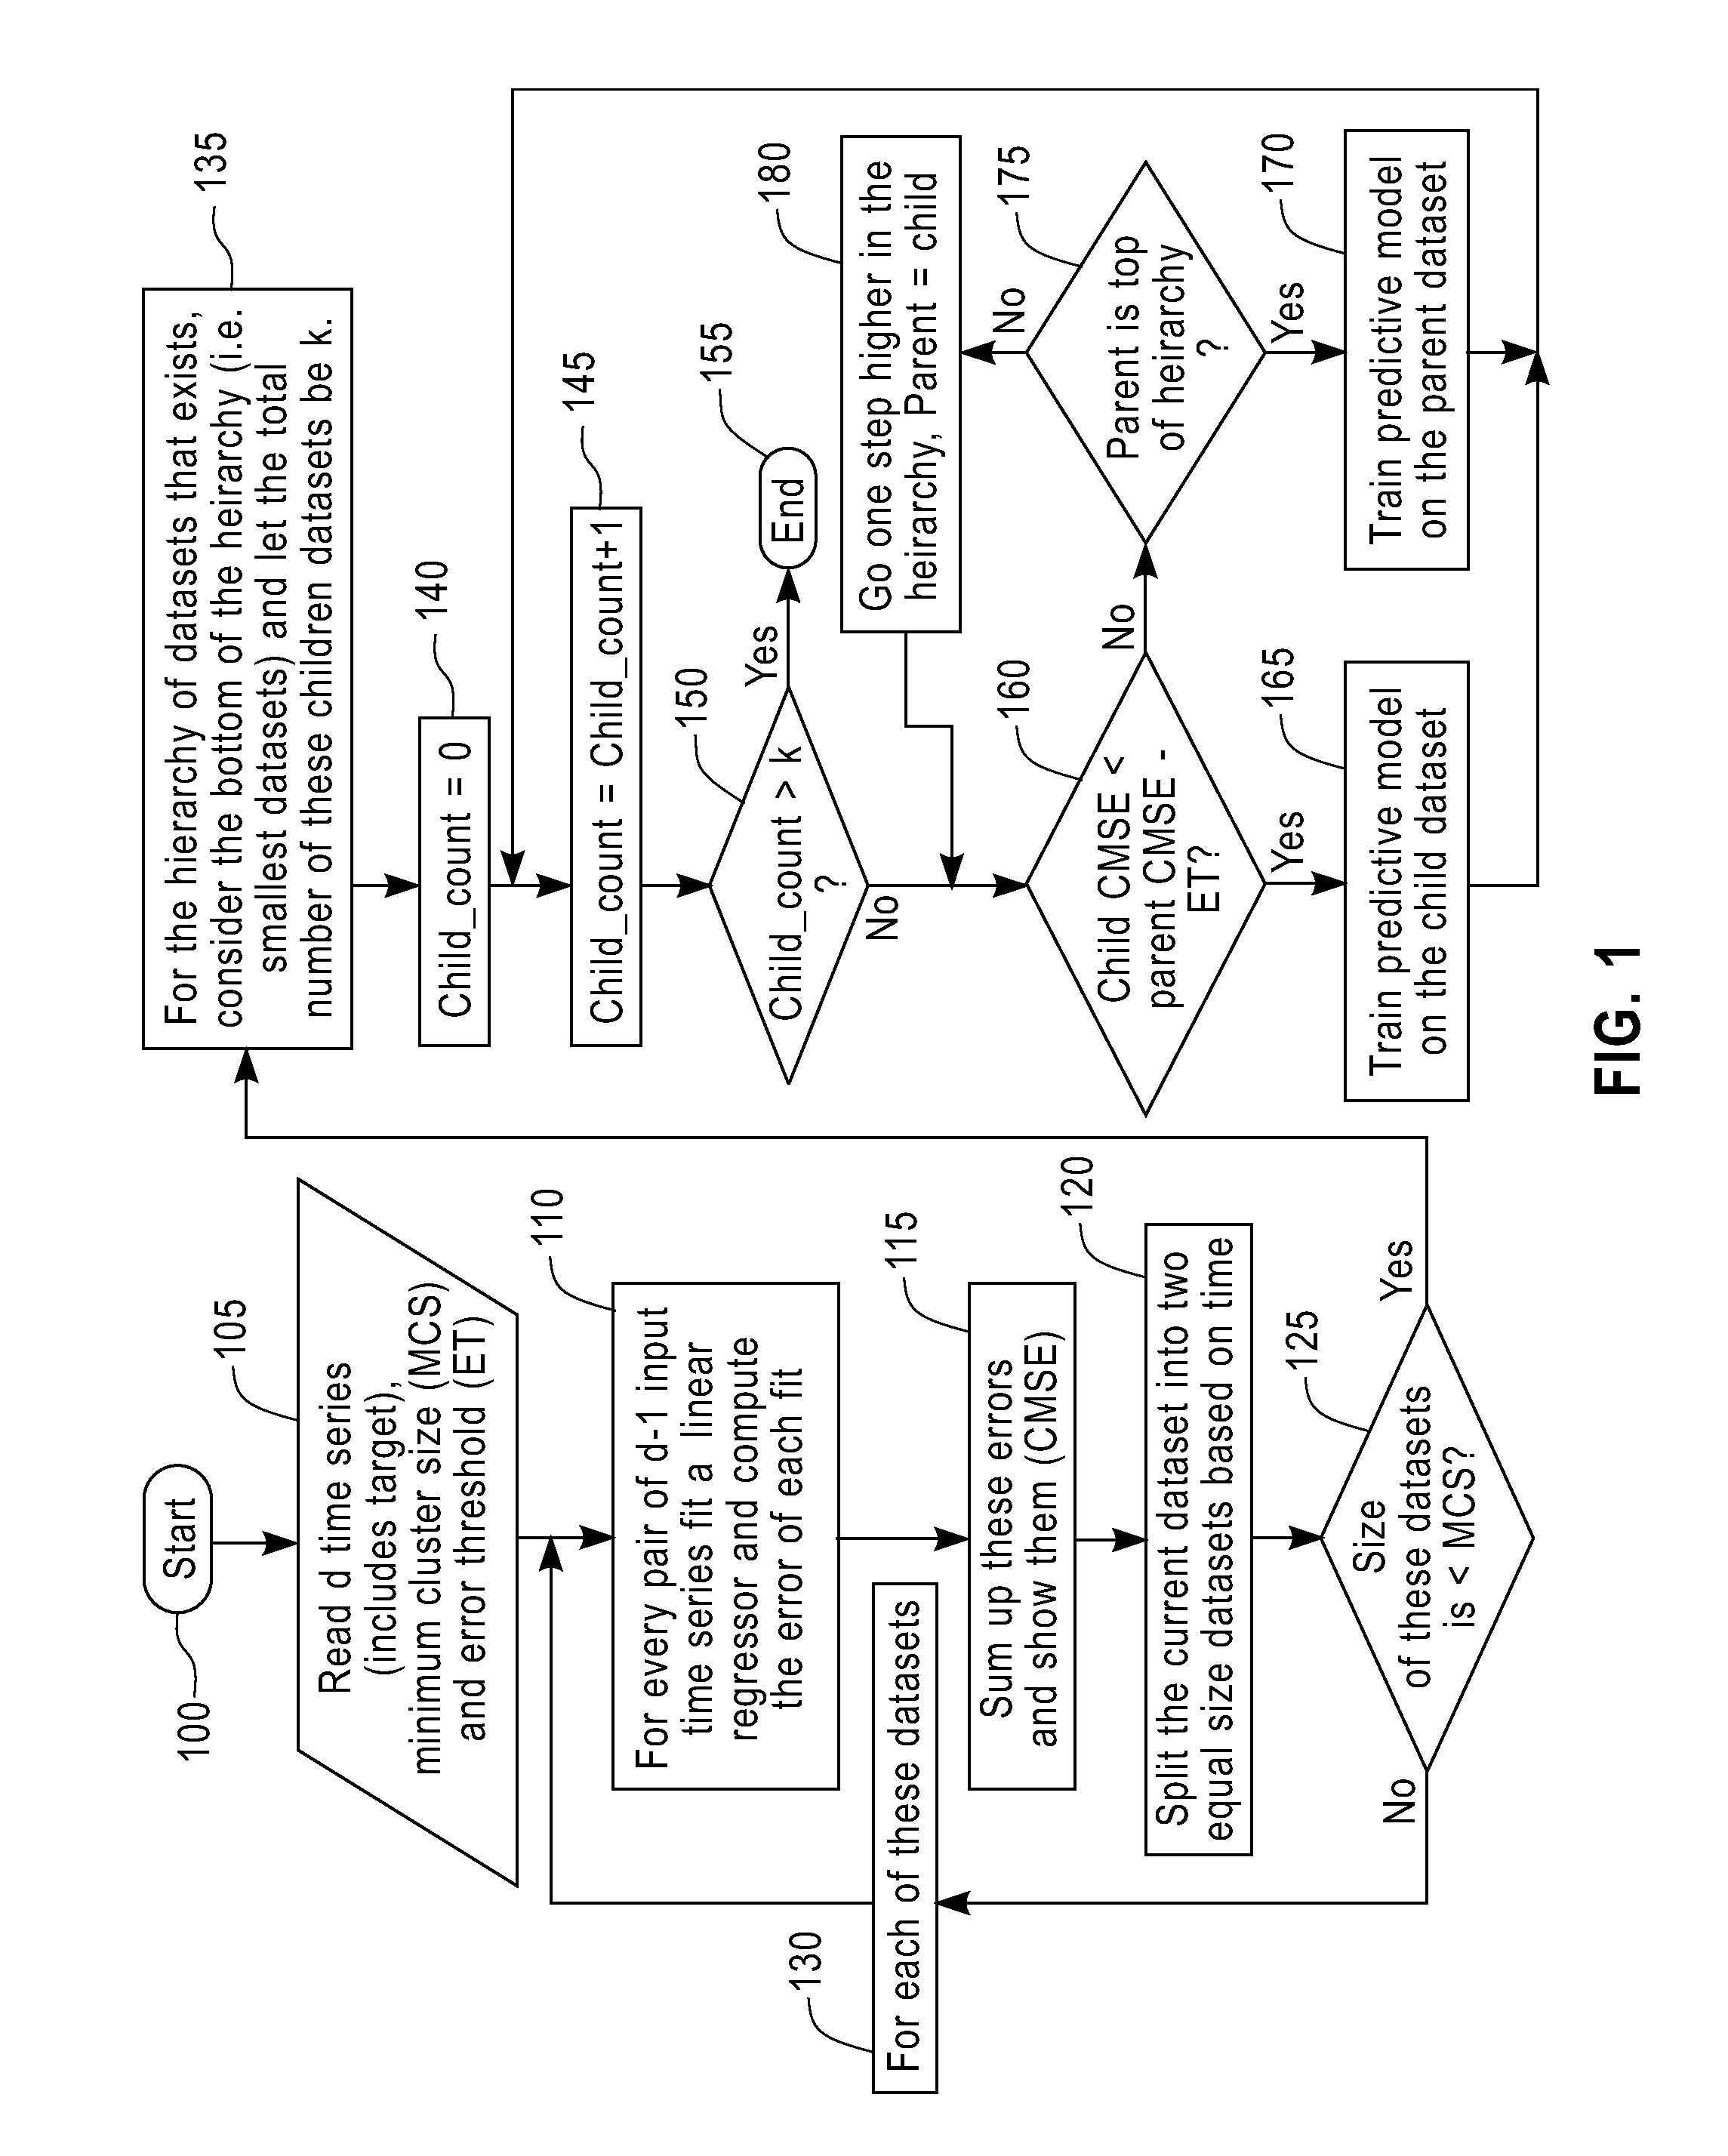 Multi-step time series prediction in complex instrumented domains